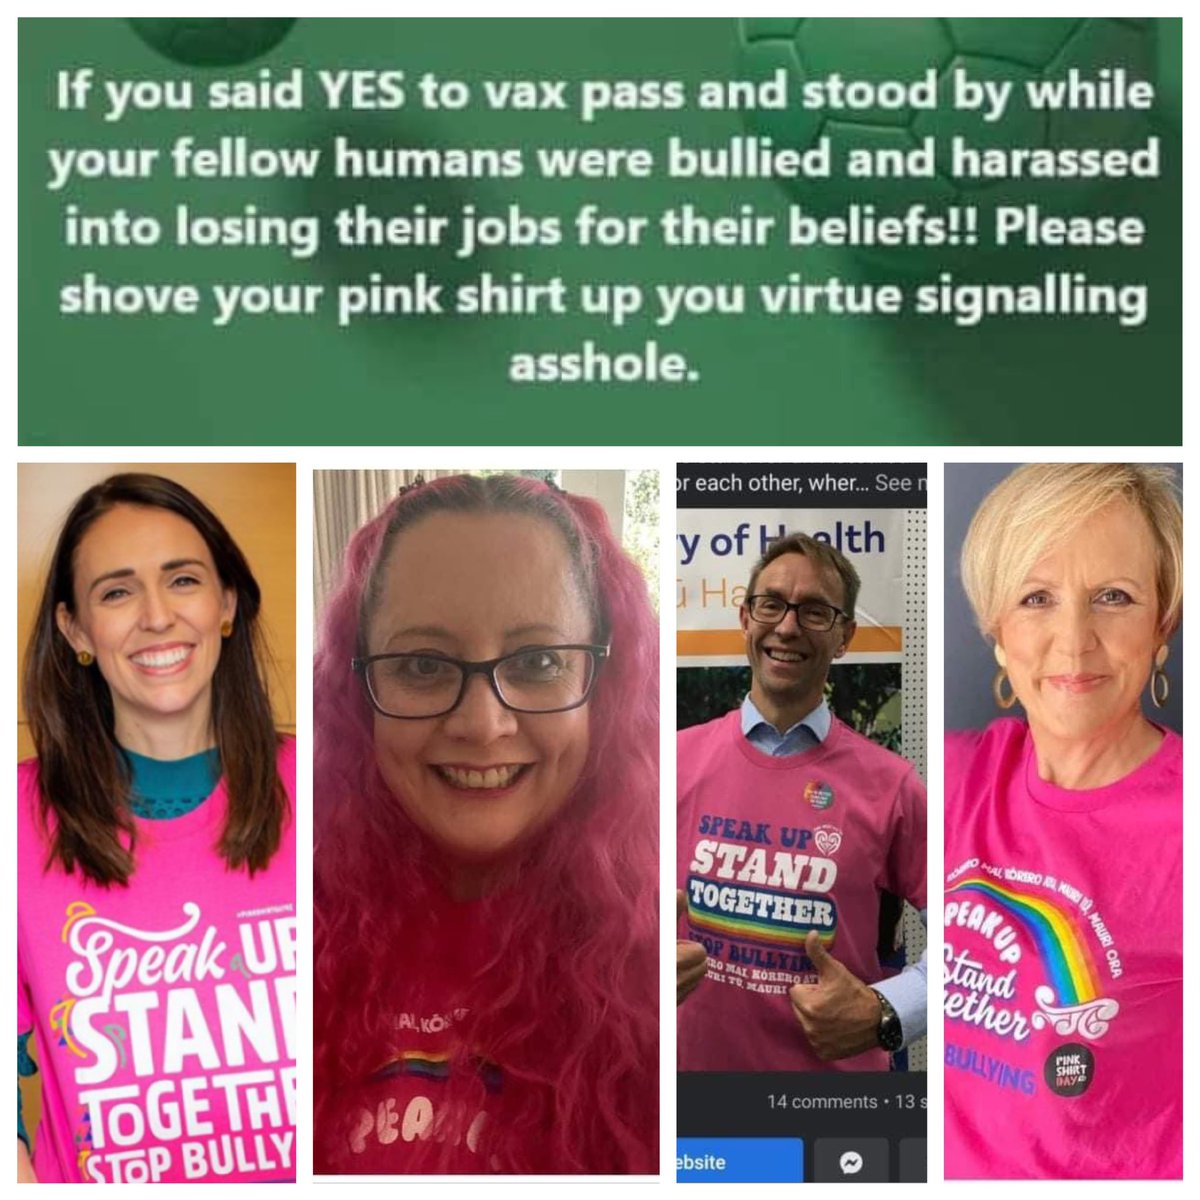 The people who pushed #pinkShirt day are bullies & some of the most cruel people in #newzealand #nzpol